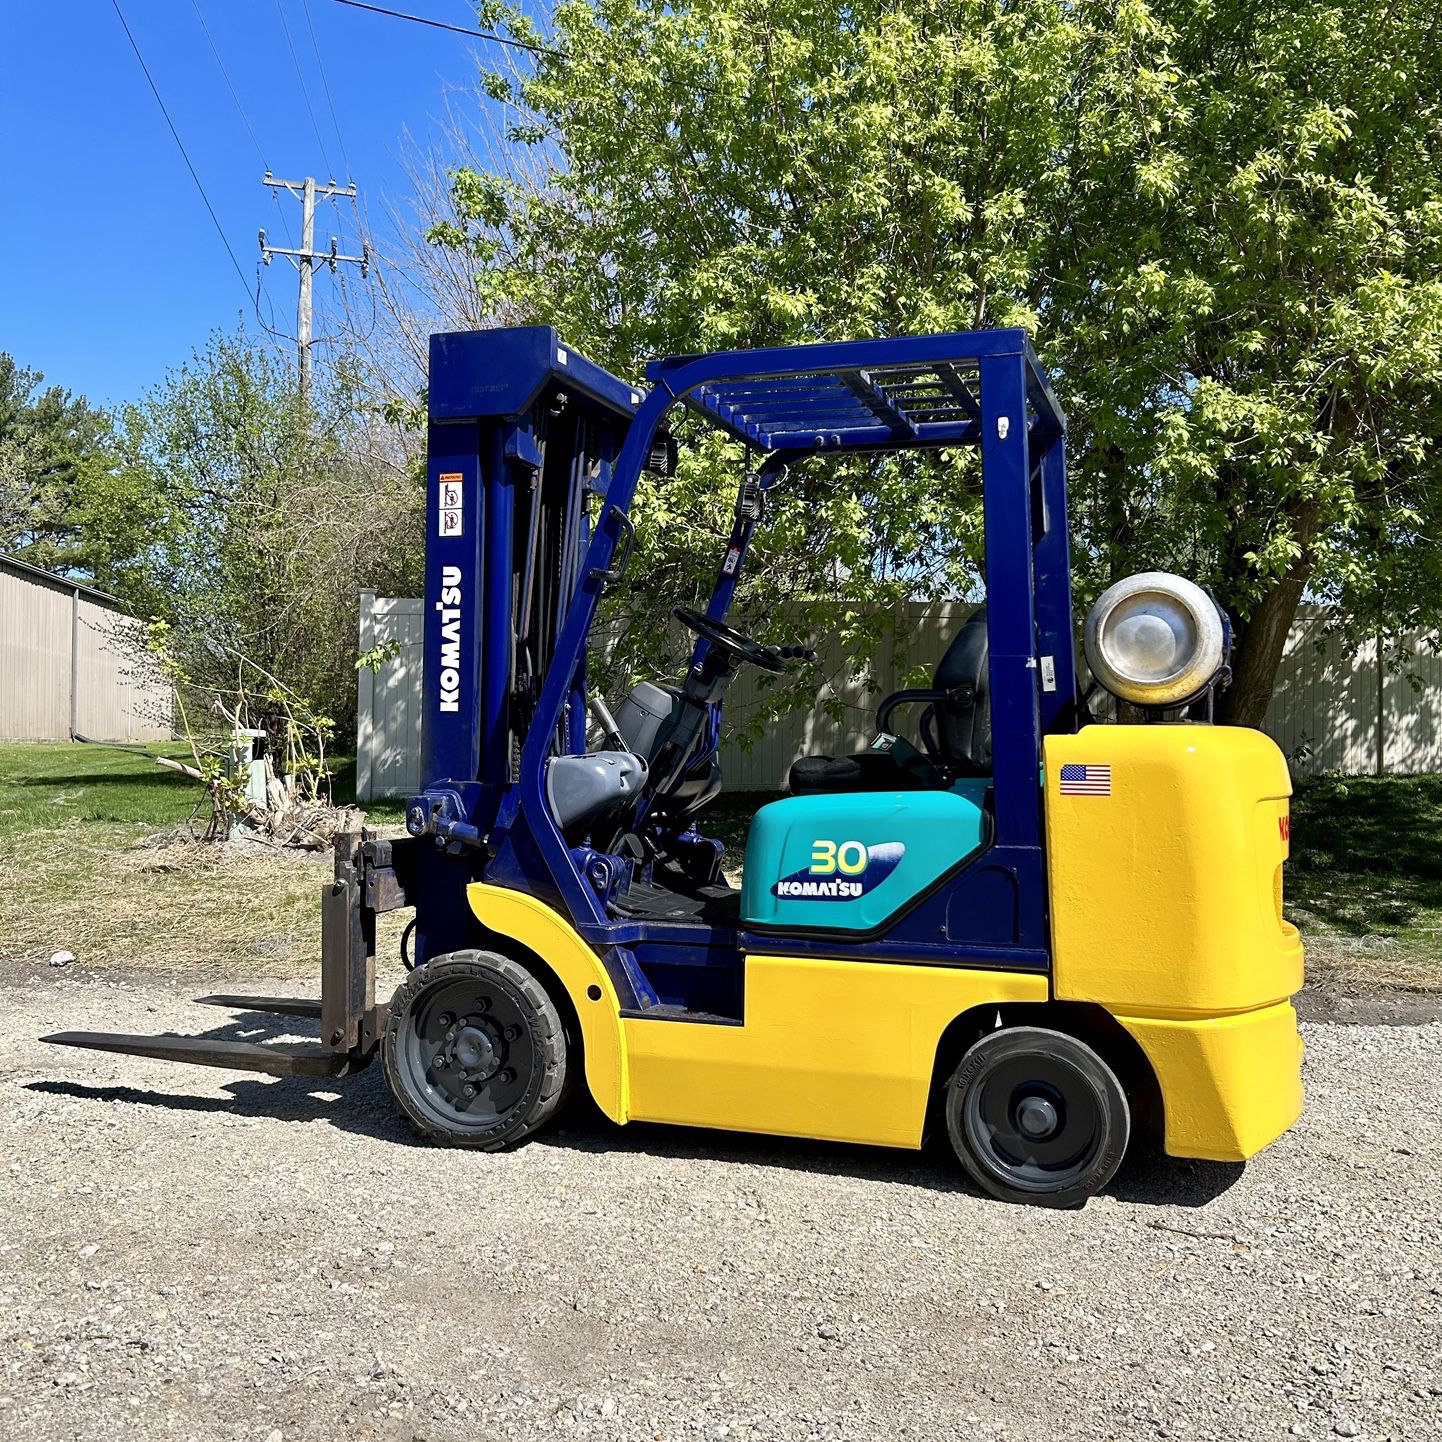 2020 KOMATSU 30 Forklift. Capacity 6000 Lb. Triple Mast. Side Shift. 4 Hydraulic Levers. No Issue! No Leaks! Propane. Only 6400 Hours. Ready For Use!